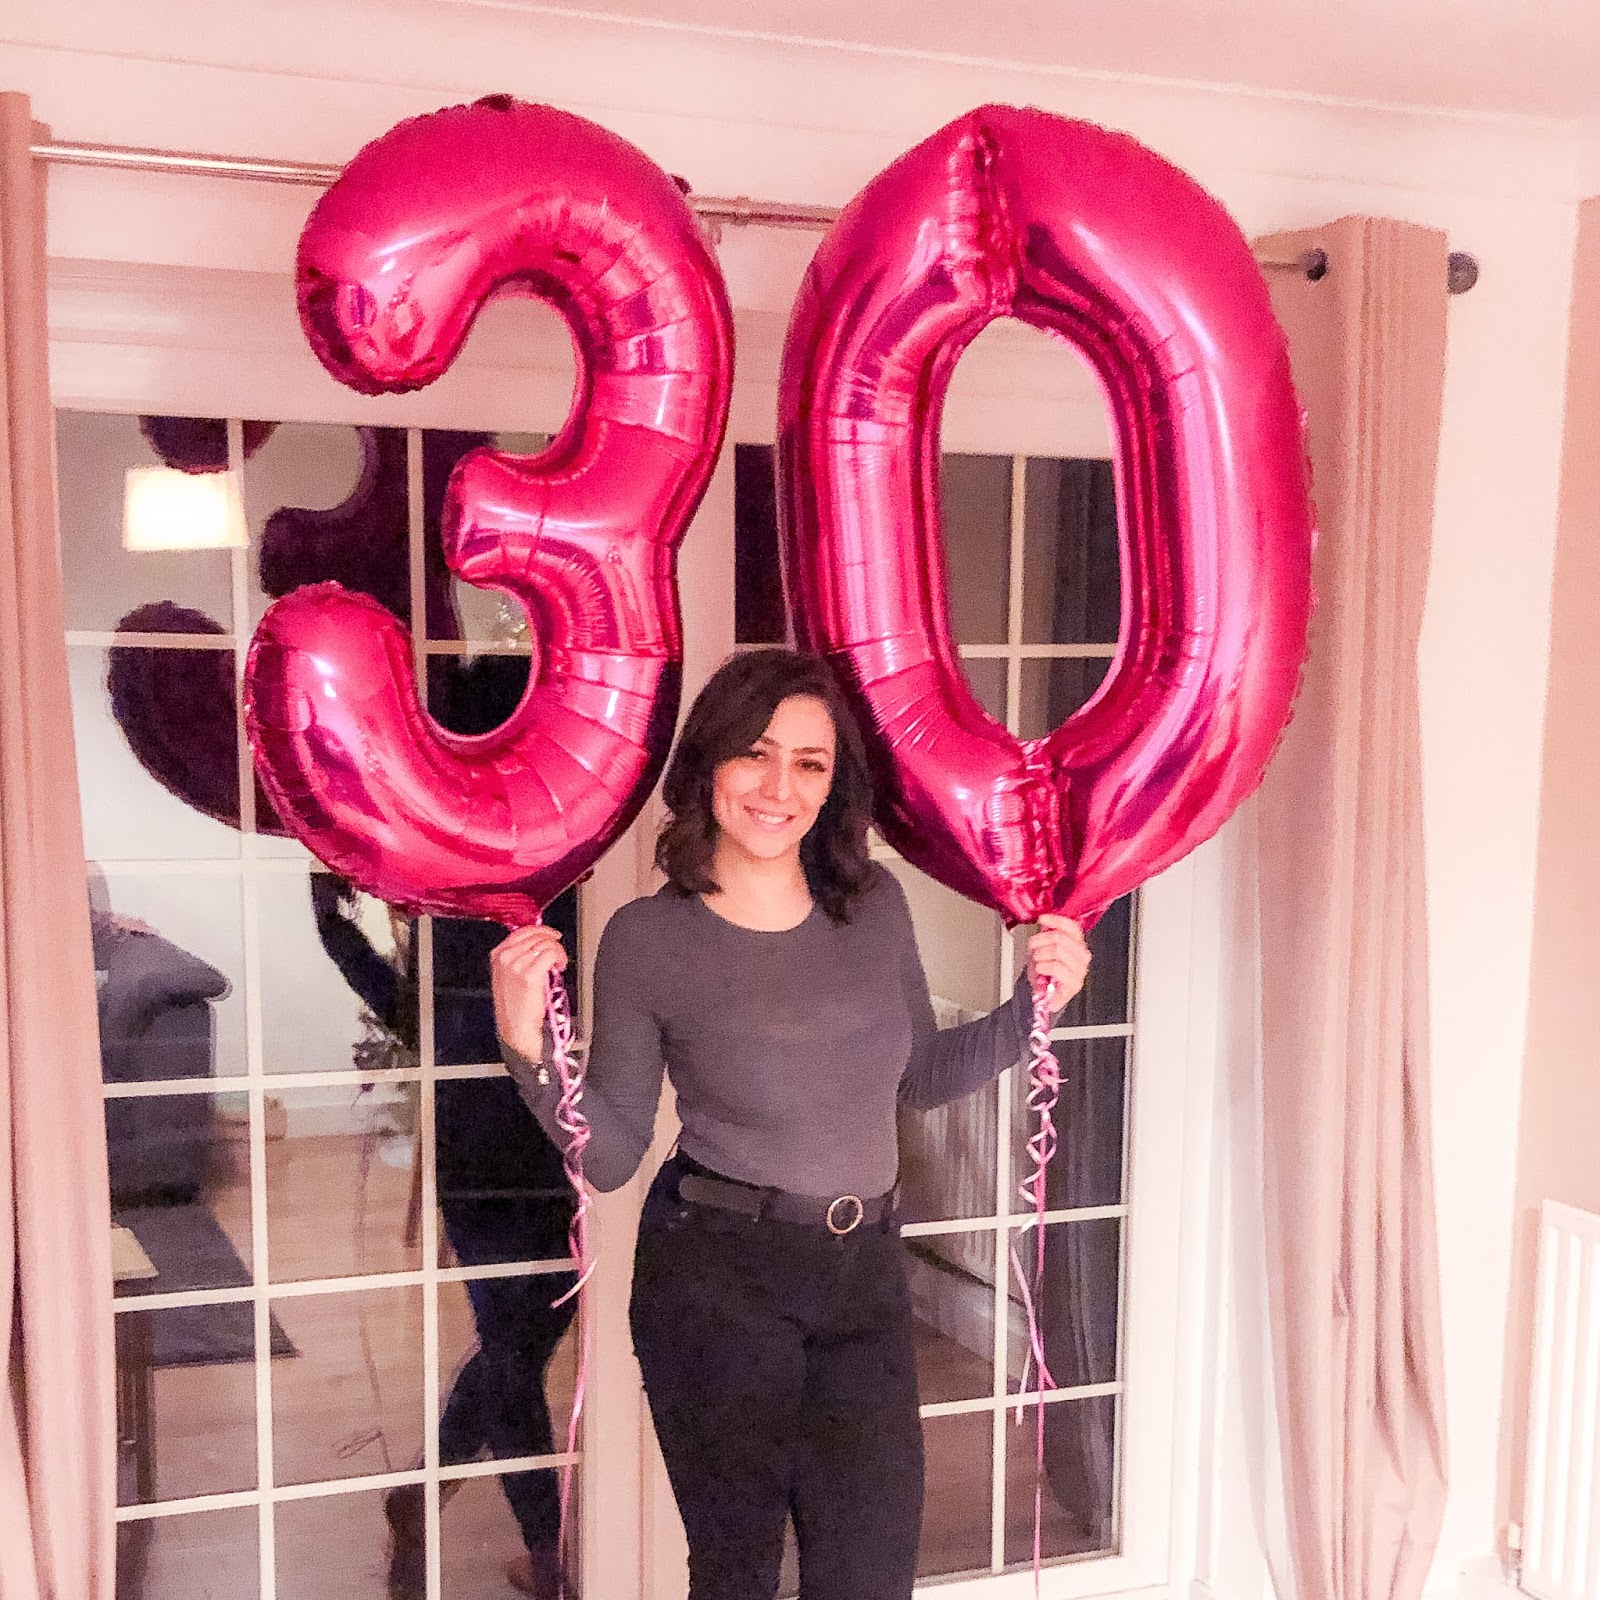 I'm holding two pink foil helium balloons writing out the number 30.